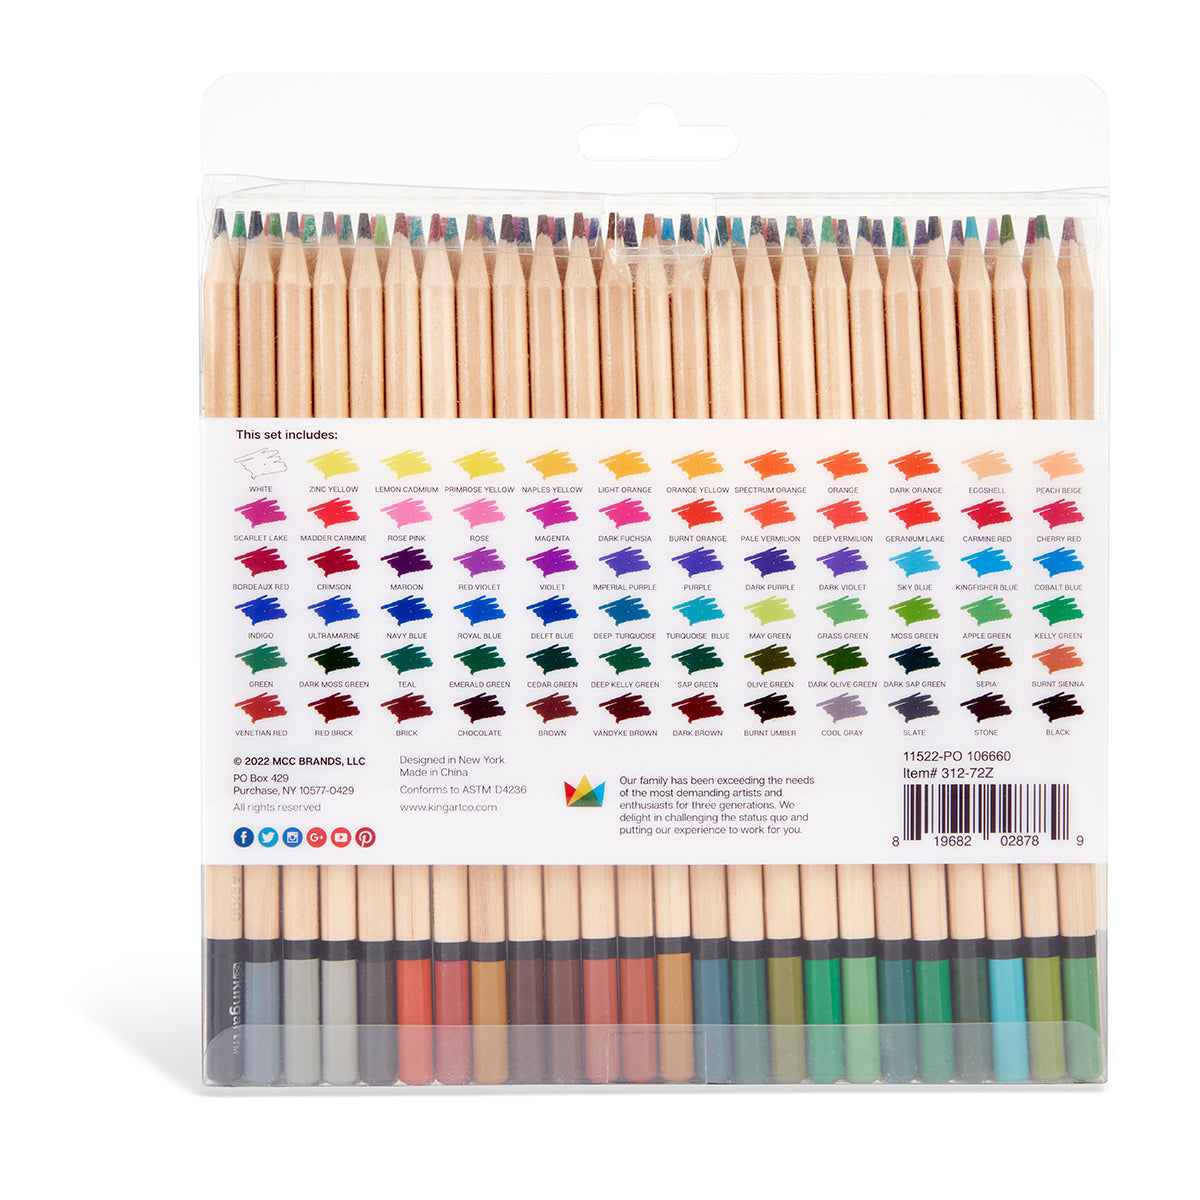 COOL BANK 72 Colored Pencils Set with Drawing Pad, Soft Artist Quality Lead  for Sketching, Shading and Coloring